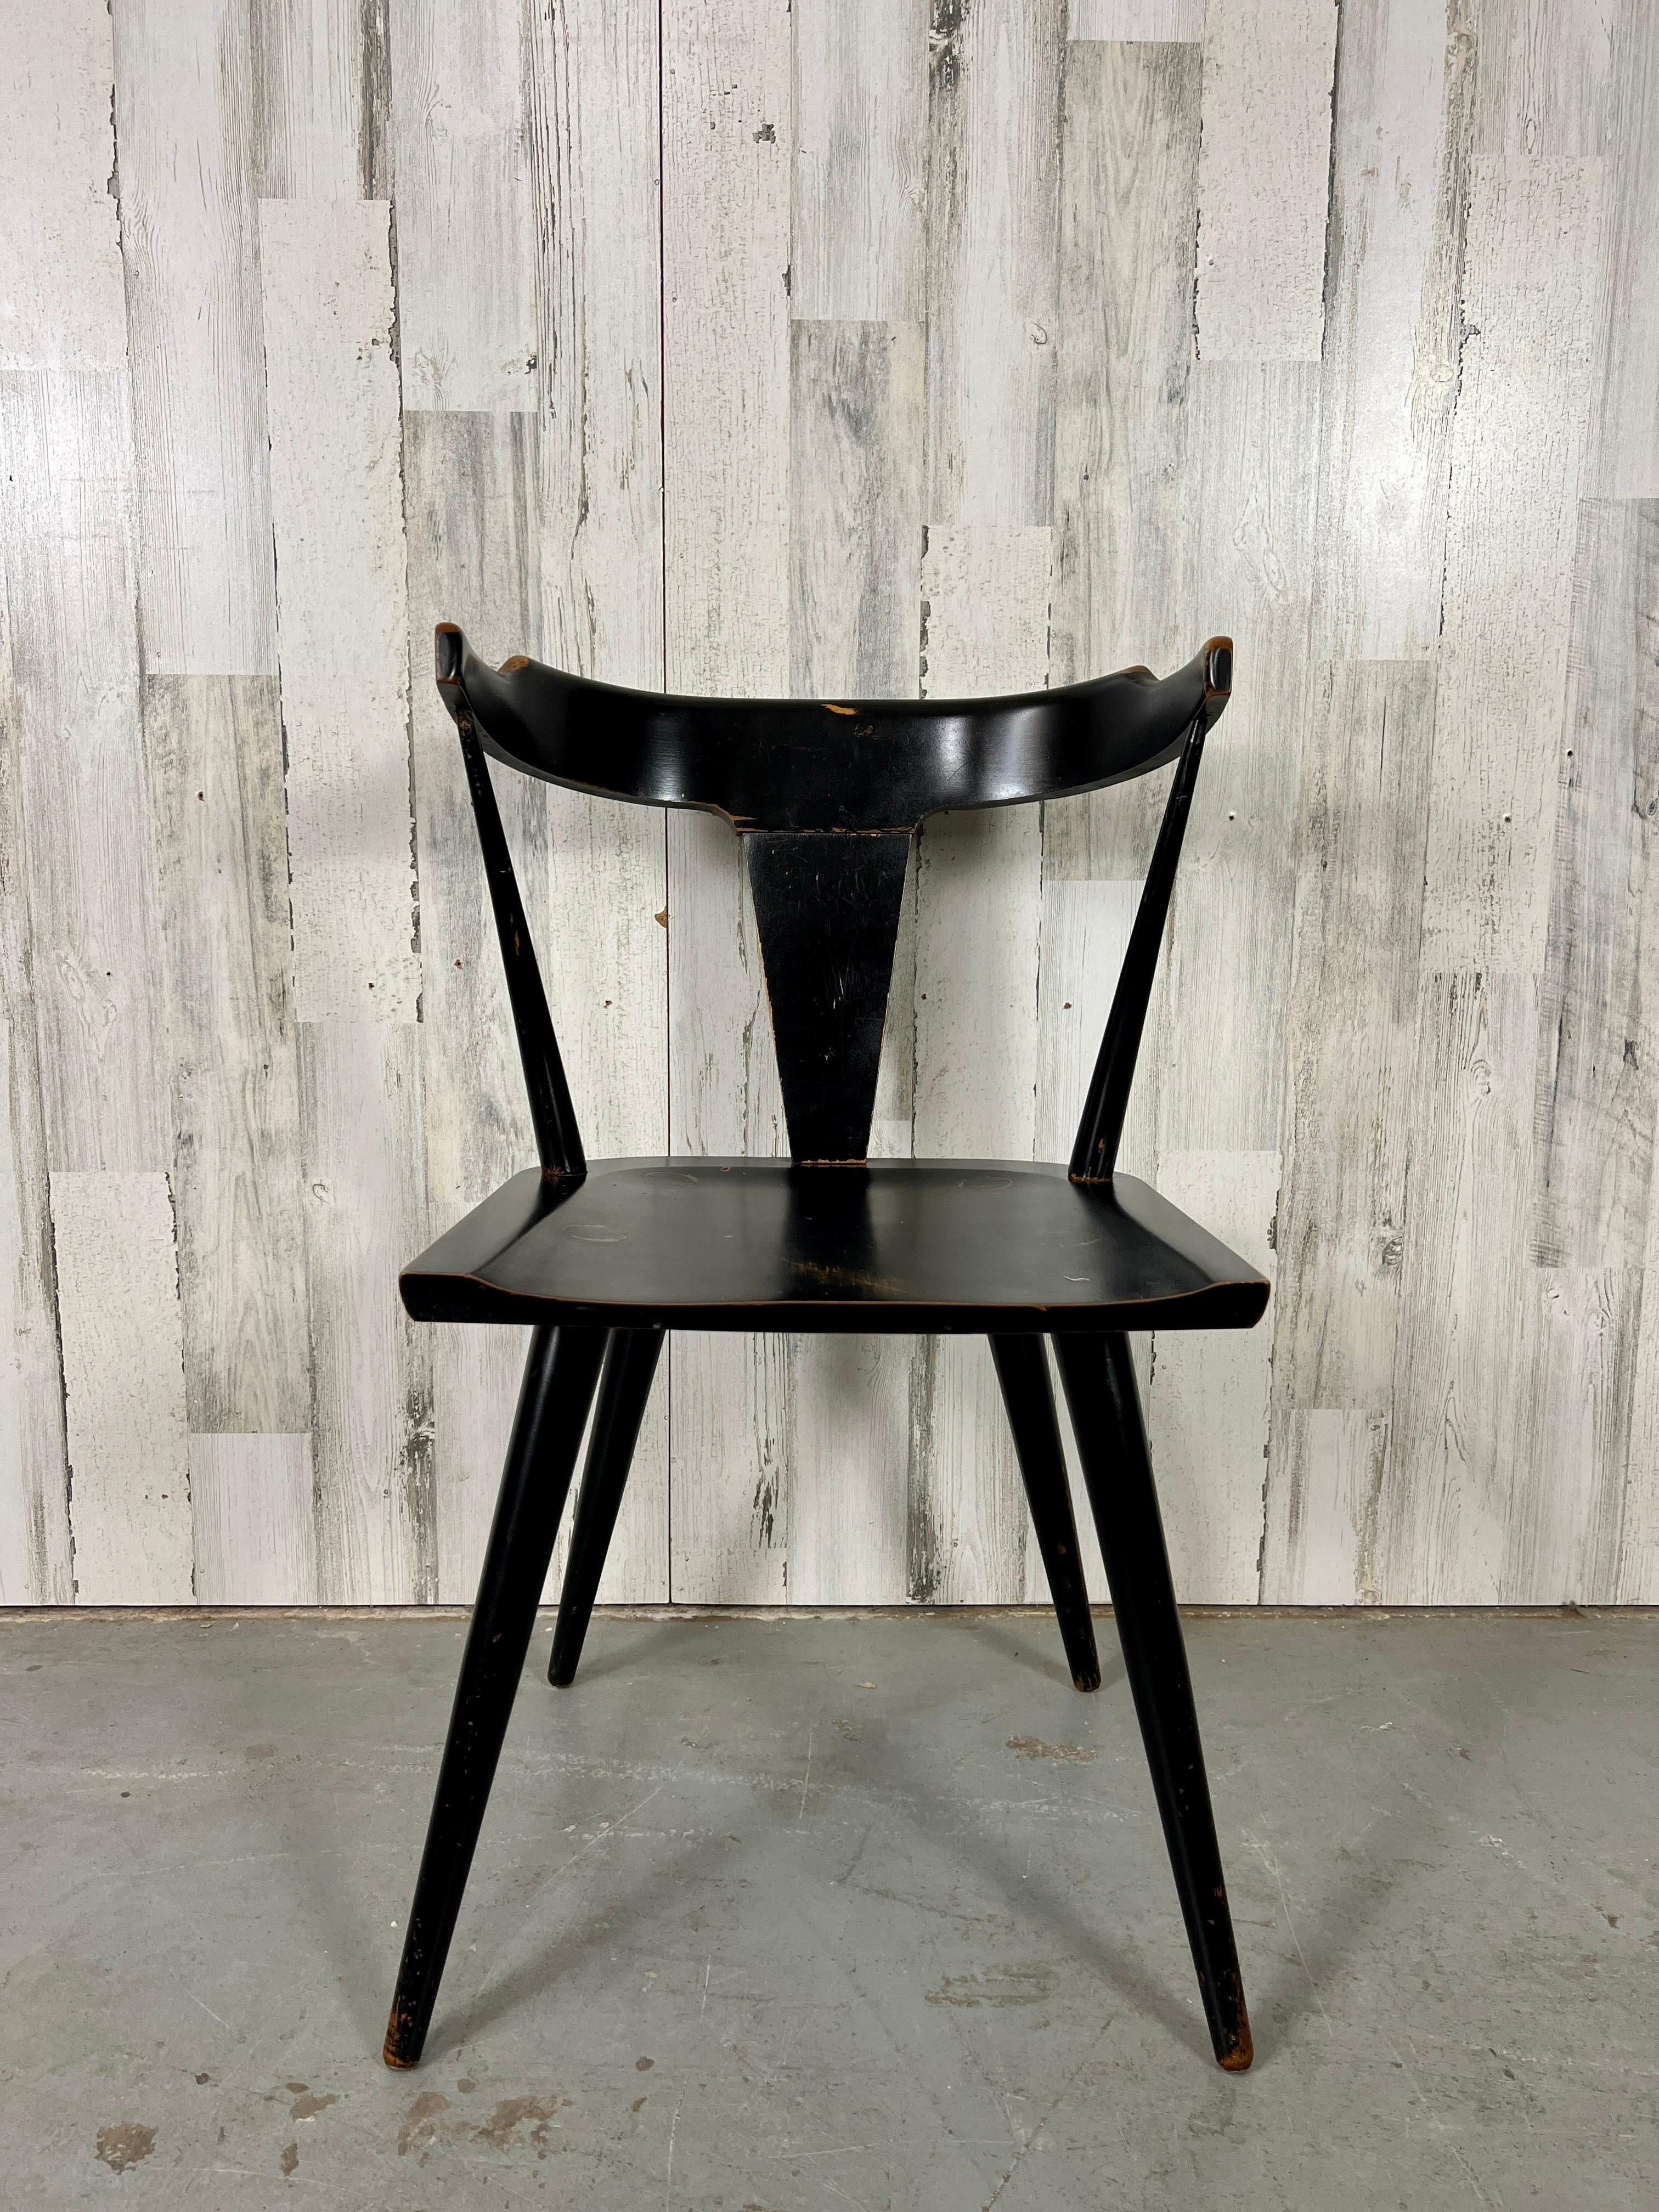 Very sturdy with worn black lacquer makes this chair a great companion for a desk or in a corner of a room, Original finish.